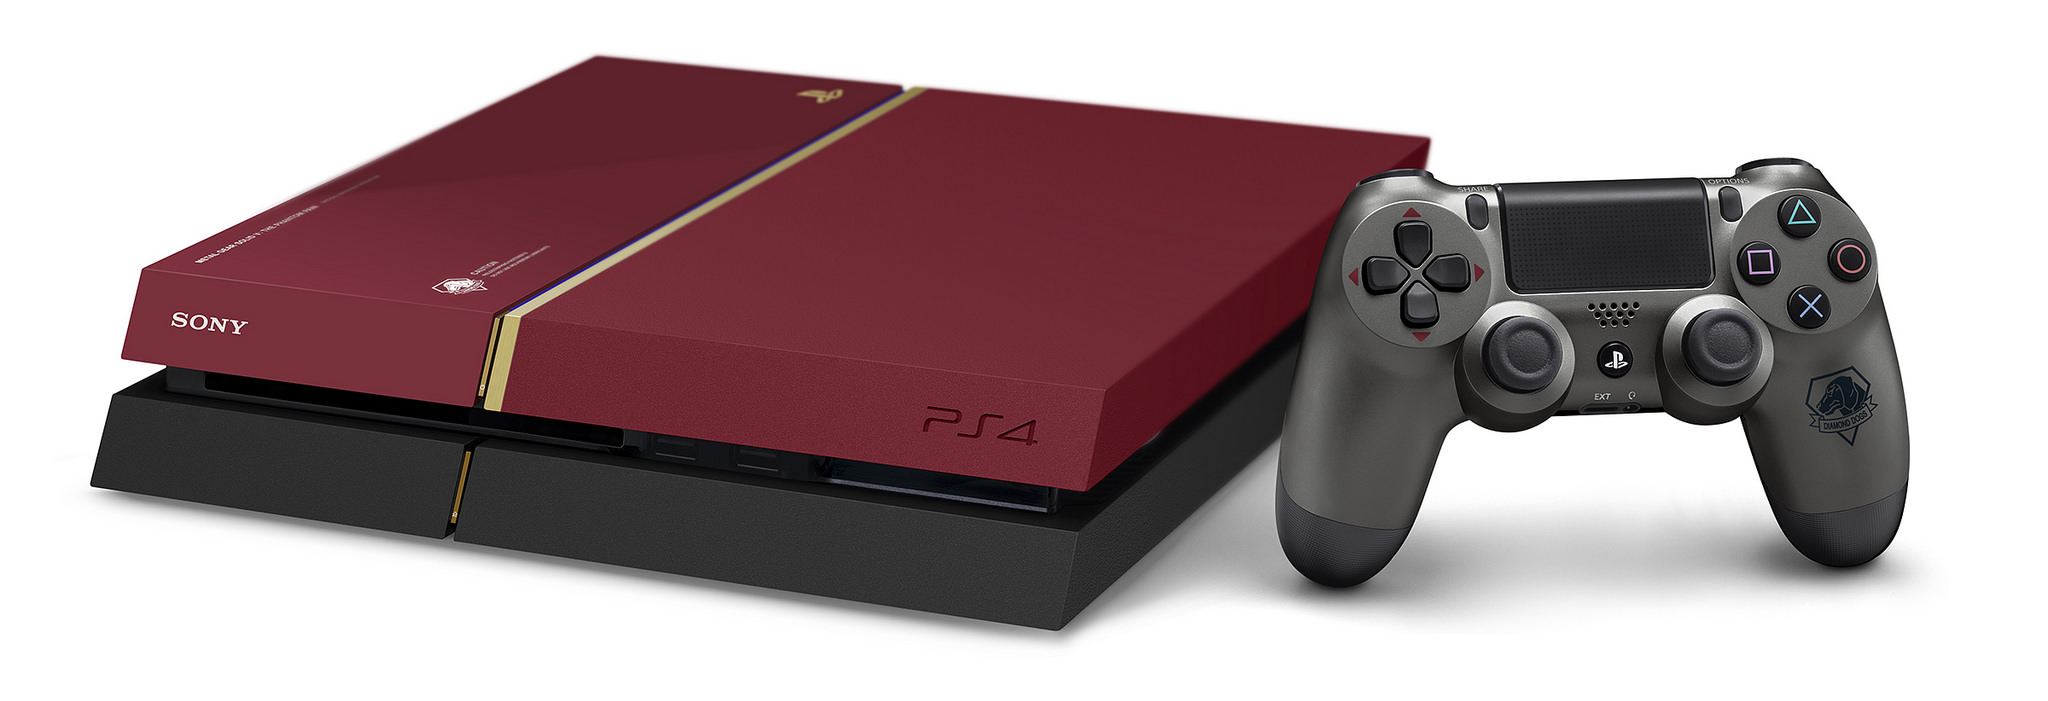 Metal Gear Solid 5 The Phantom Pain Limited Edition PS4 auch in Europa